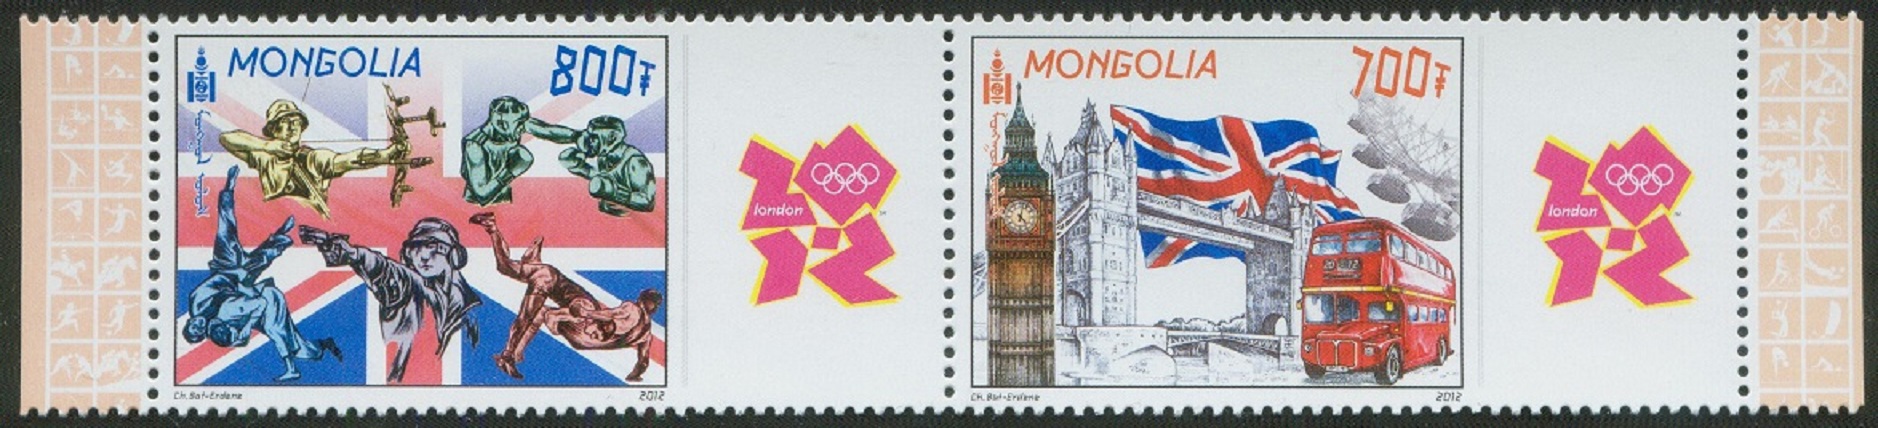 Stamp MGL 2012 July 5th MI 3834 35 OG London with Olympic pictogram No. 13 in right margin